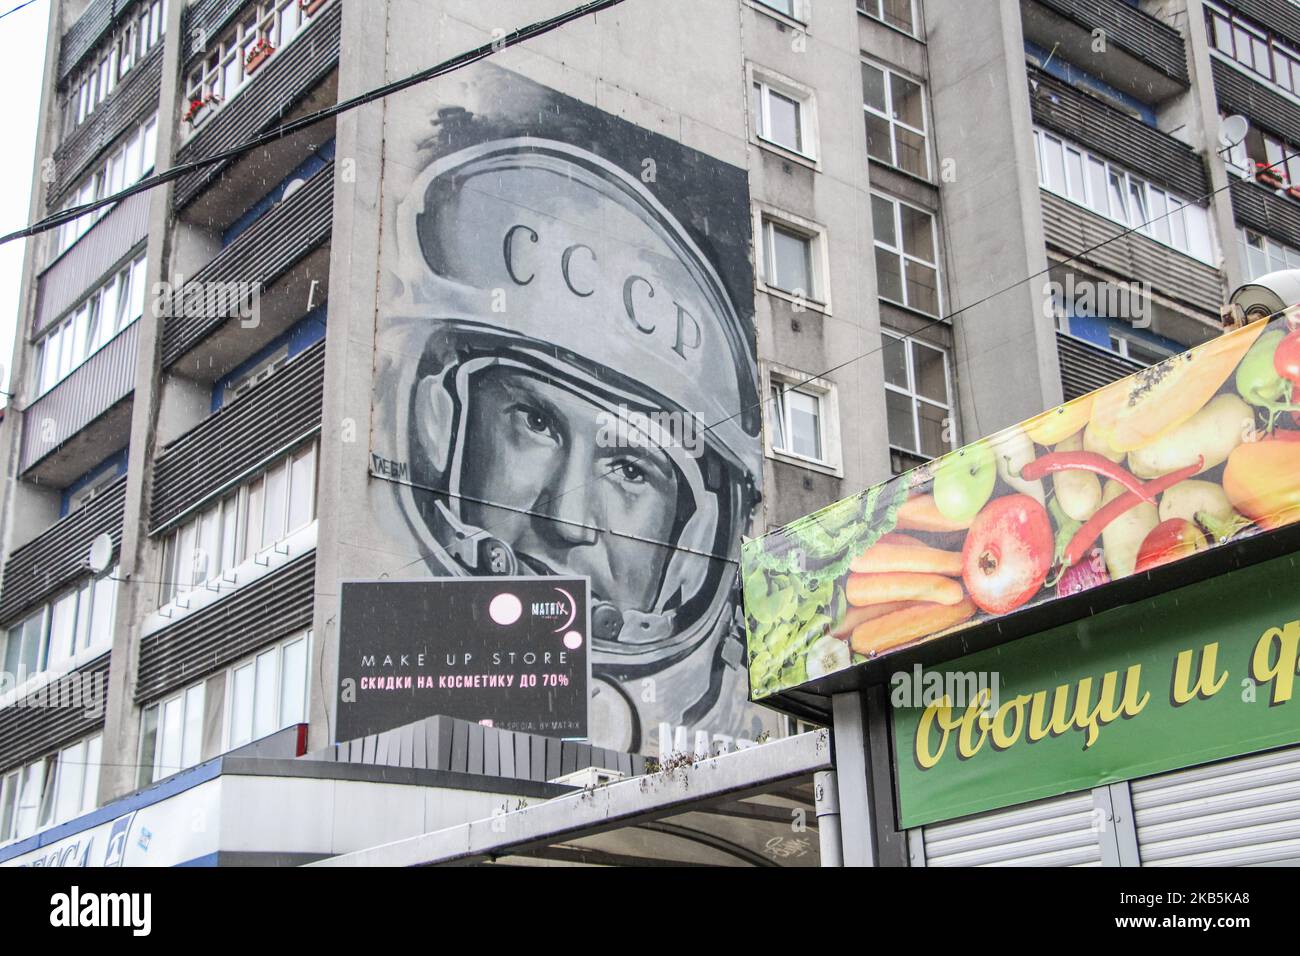 Giant mural with Alexei Leonov (Alexei Arkhipovich Leonov) portrait wearing space helmet is seen in Kaliningrad, Russia, on 8 September 2019 Leonov is the first man to walk in space, and honorary citizen of Kaliningrad. On 18.03.1965, he became the first human to conduct extravehicular activity (EVA), exiting the capsule during the Voskhod 2 mission for a 12-minute spacewalk. (Photo by Michal Fludra/NurPhoto) Stock Photo